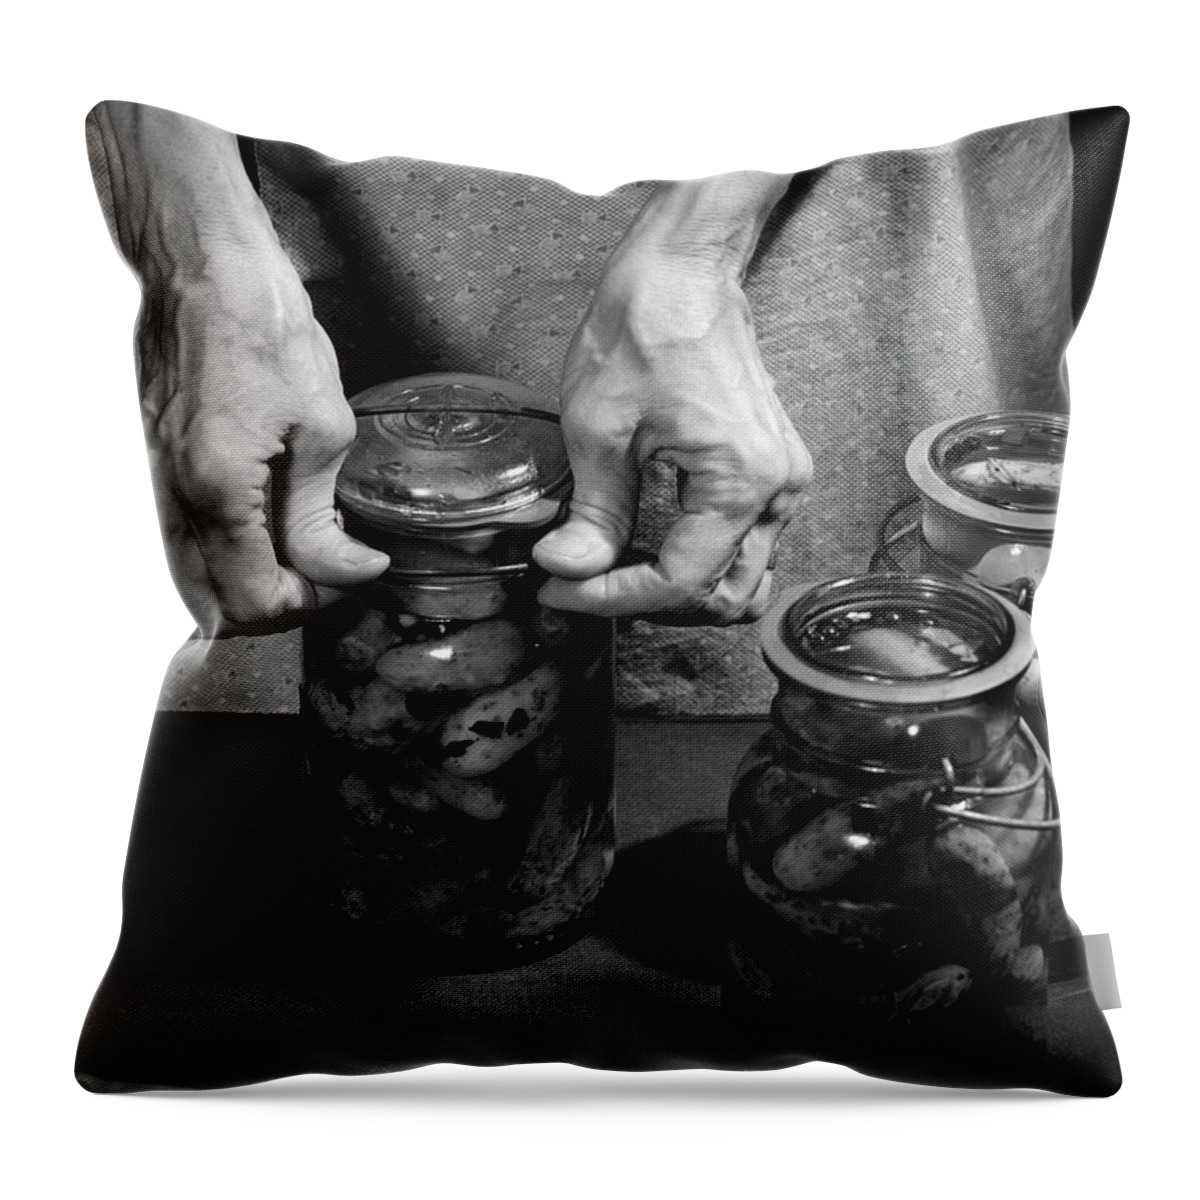 Photography Throw Pillow featuring the photograph 1950s Close-up Of Elderly Womans Hands by Vintage Images